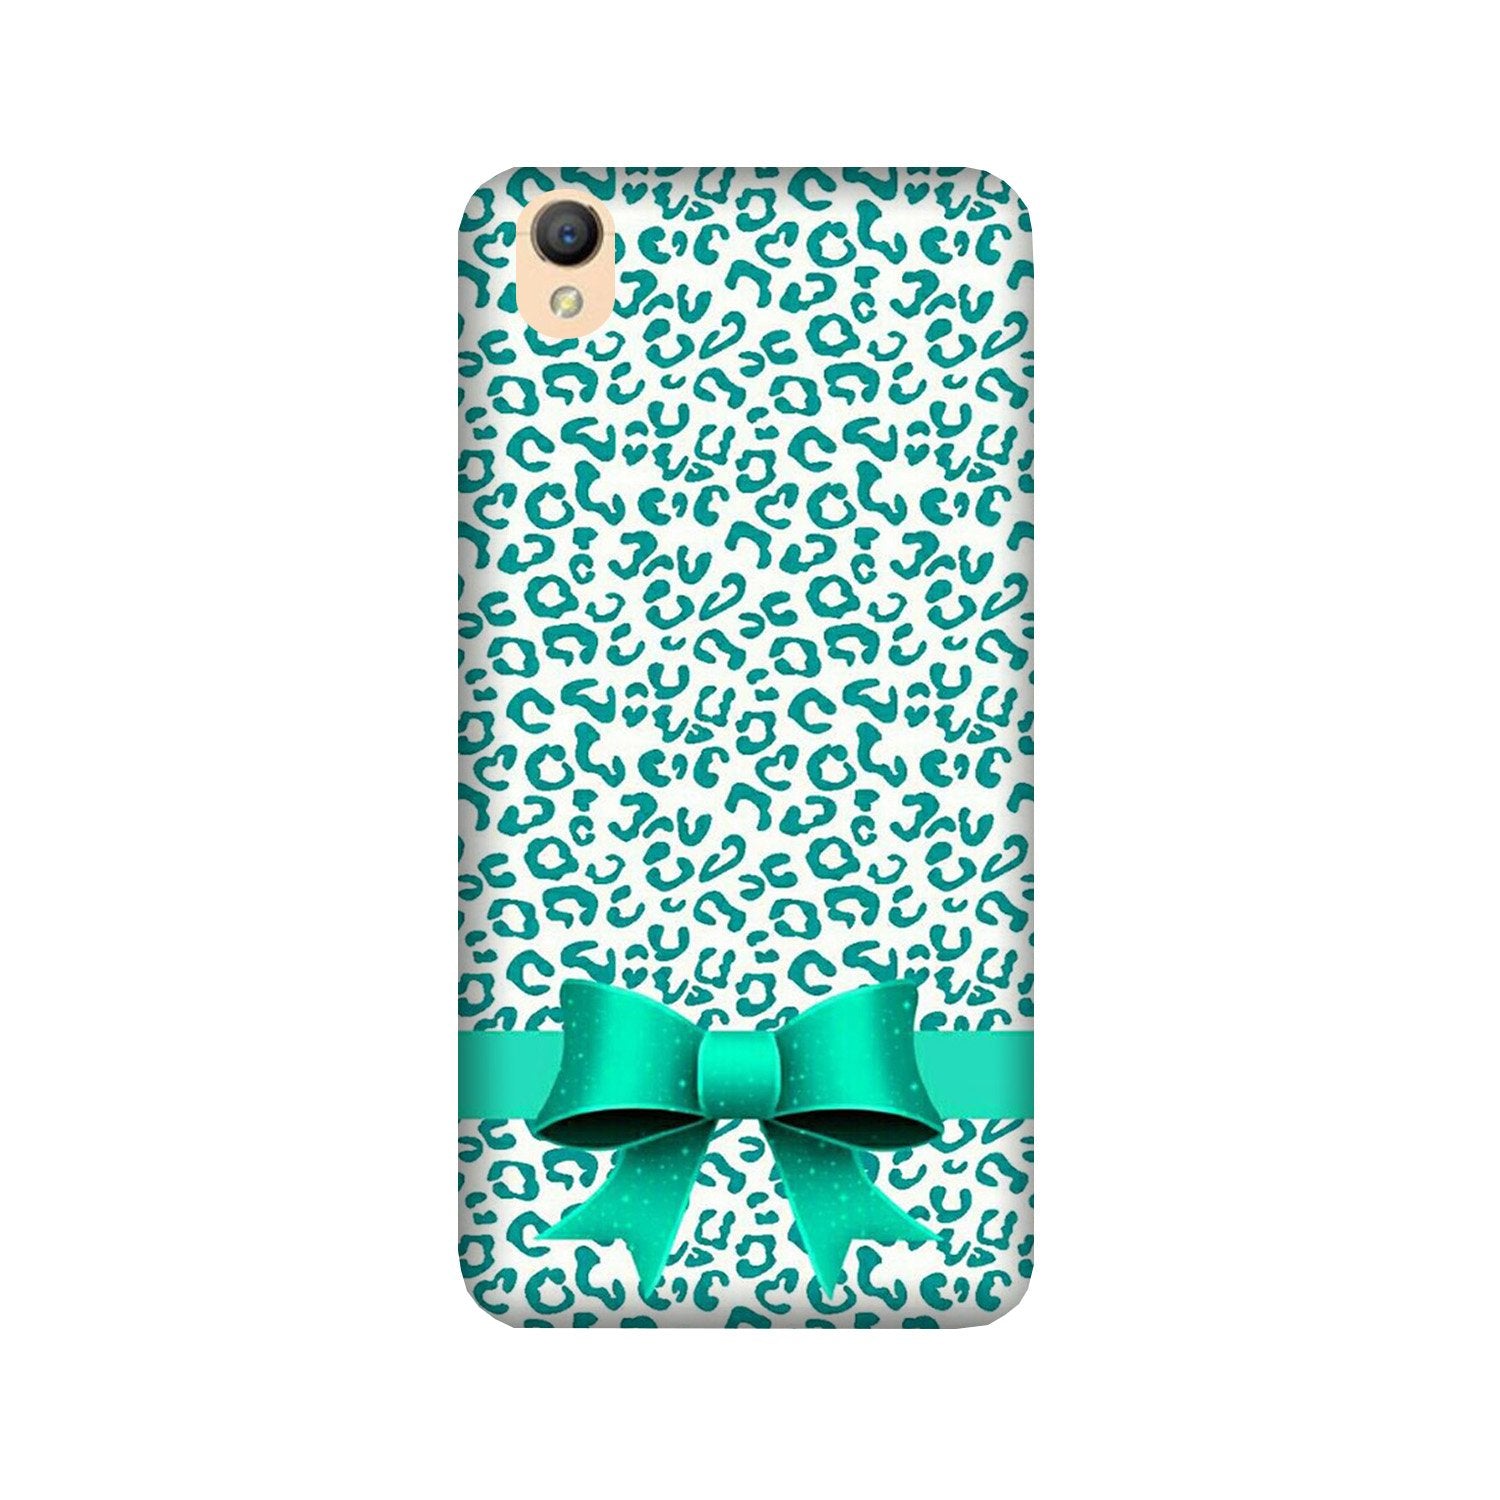 Gift Wrap6 Case for Oppo A37